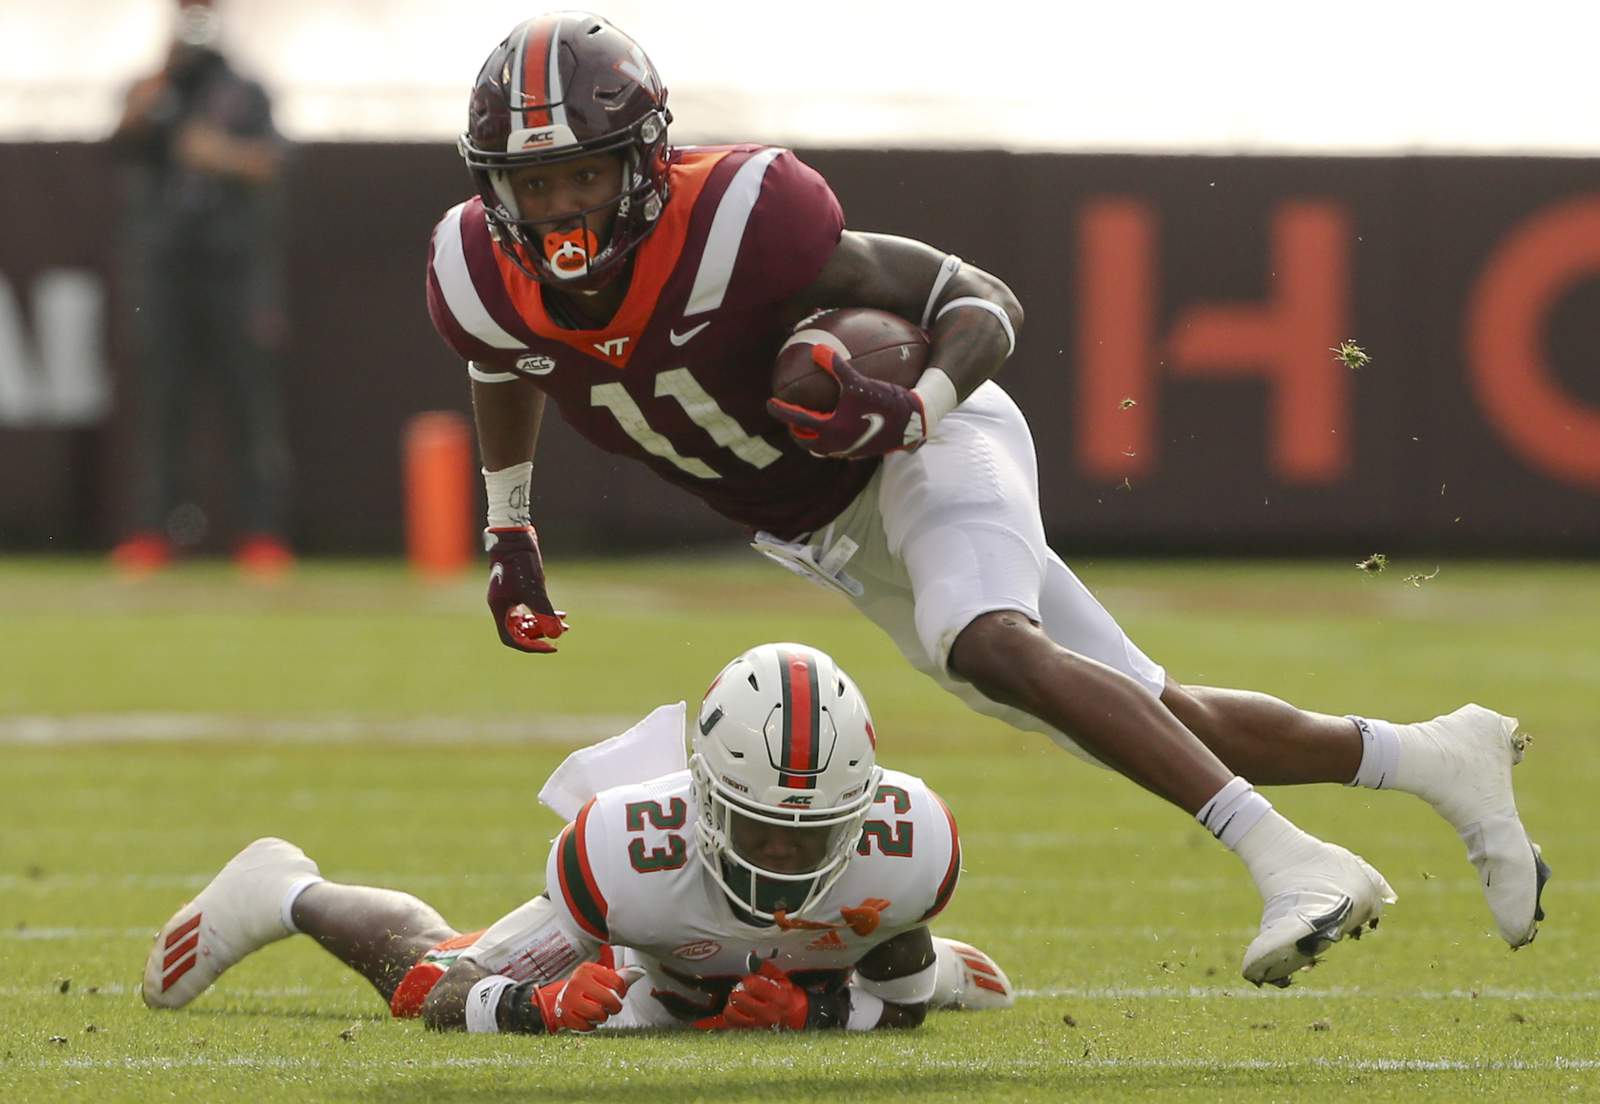 Virginia Tech recharged after bye week, ready to face #3 Clemson